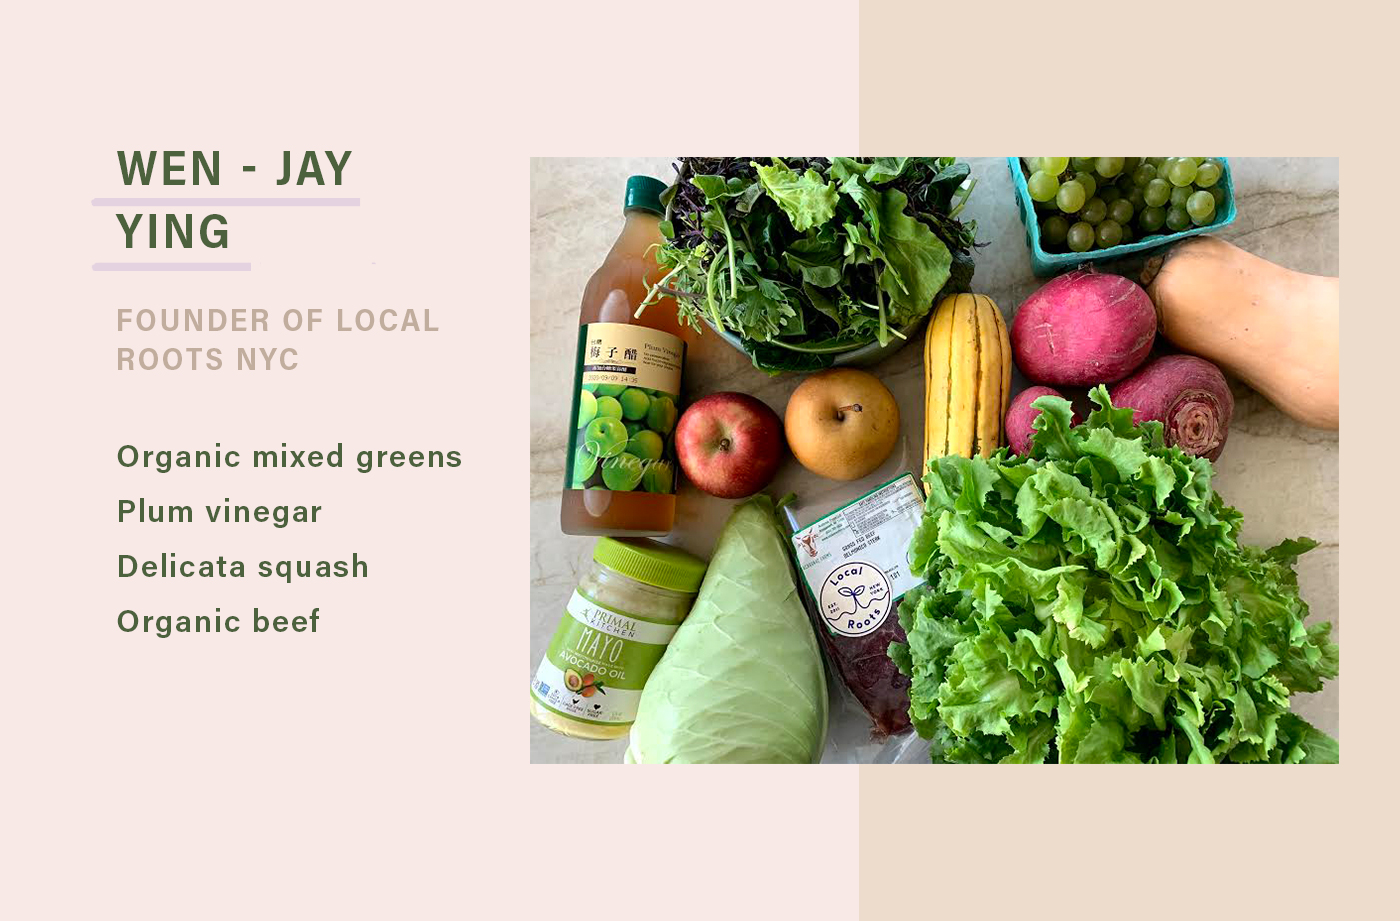 most sustainable foods that wen jay ying of local roots buys